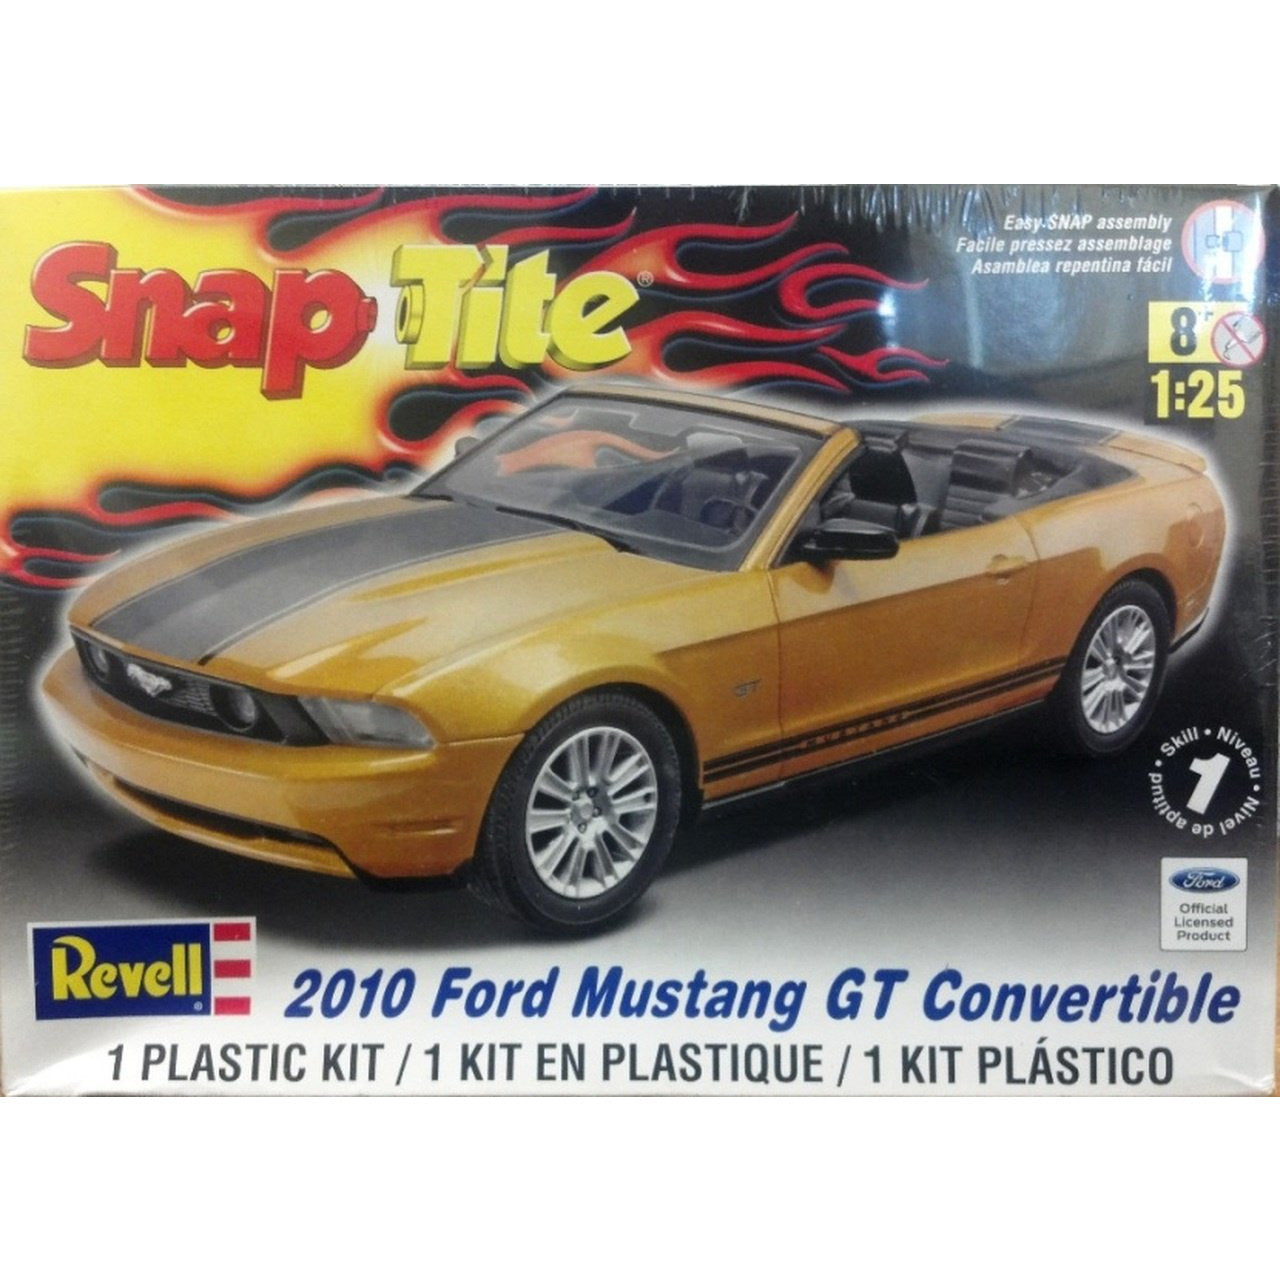 2010 Ford Mustang Convertible Snap Tite Kit 1/25 by Revell